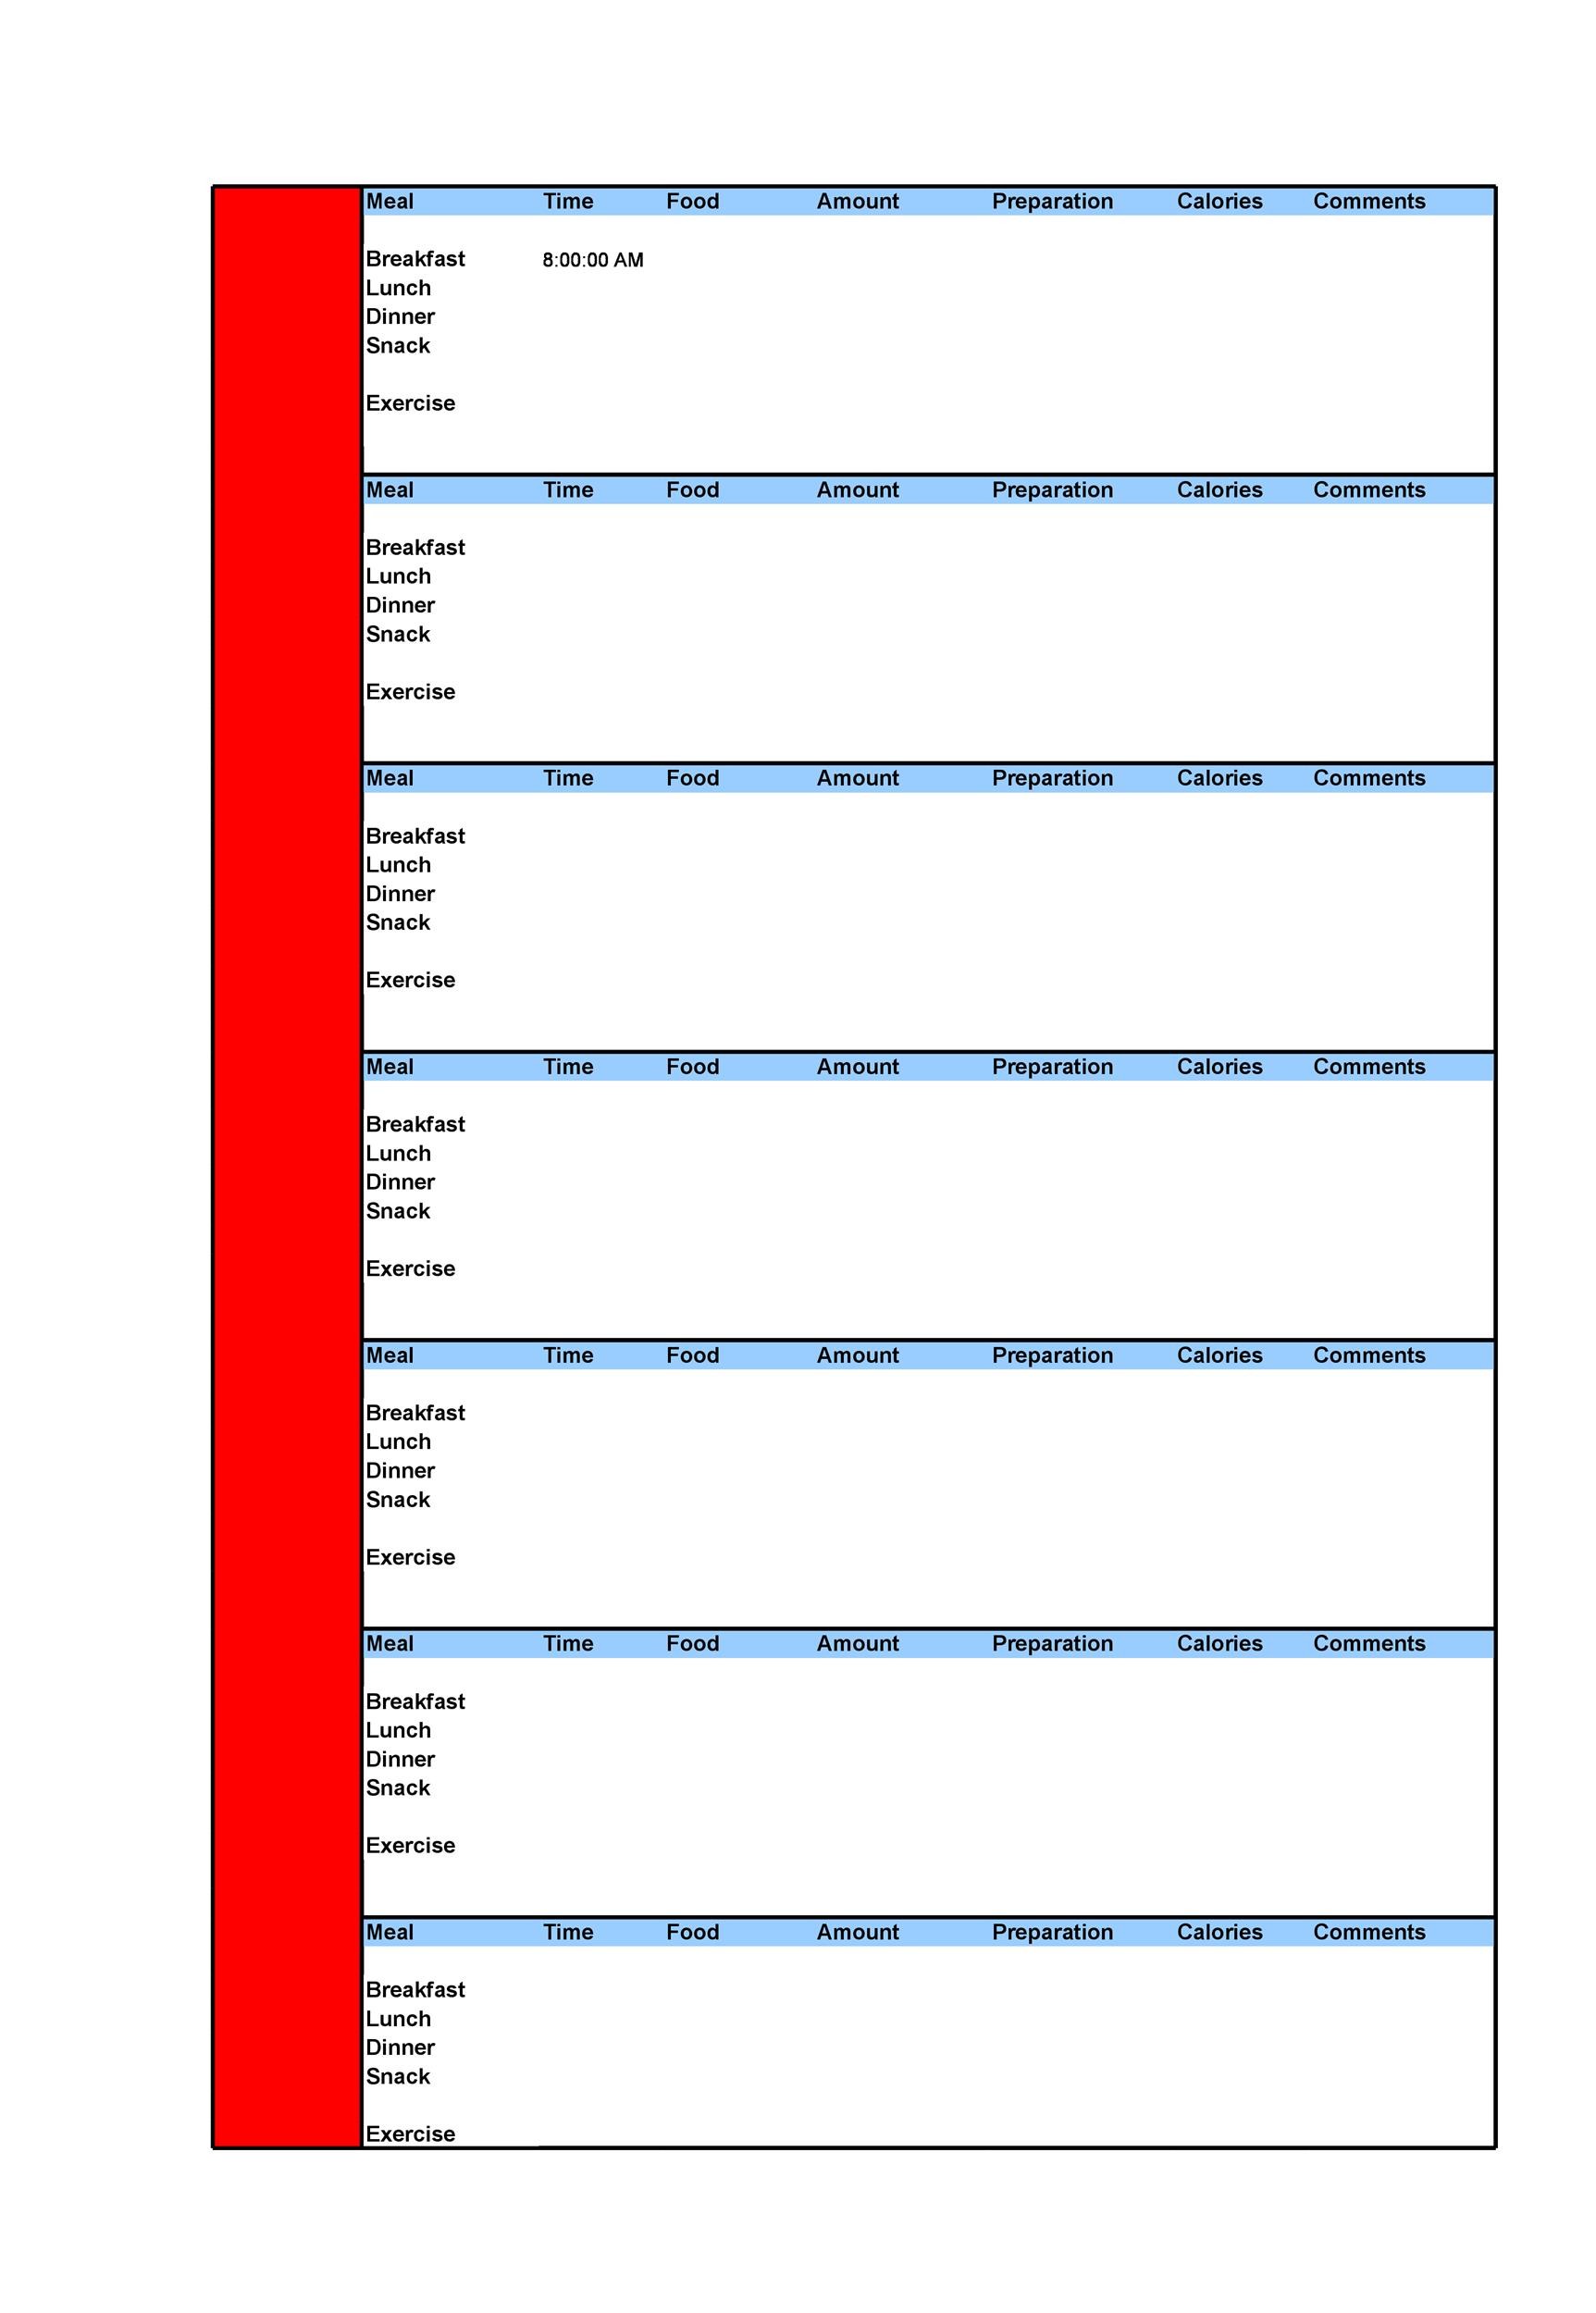 Food Diary Chart Template